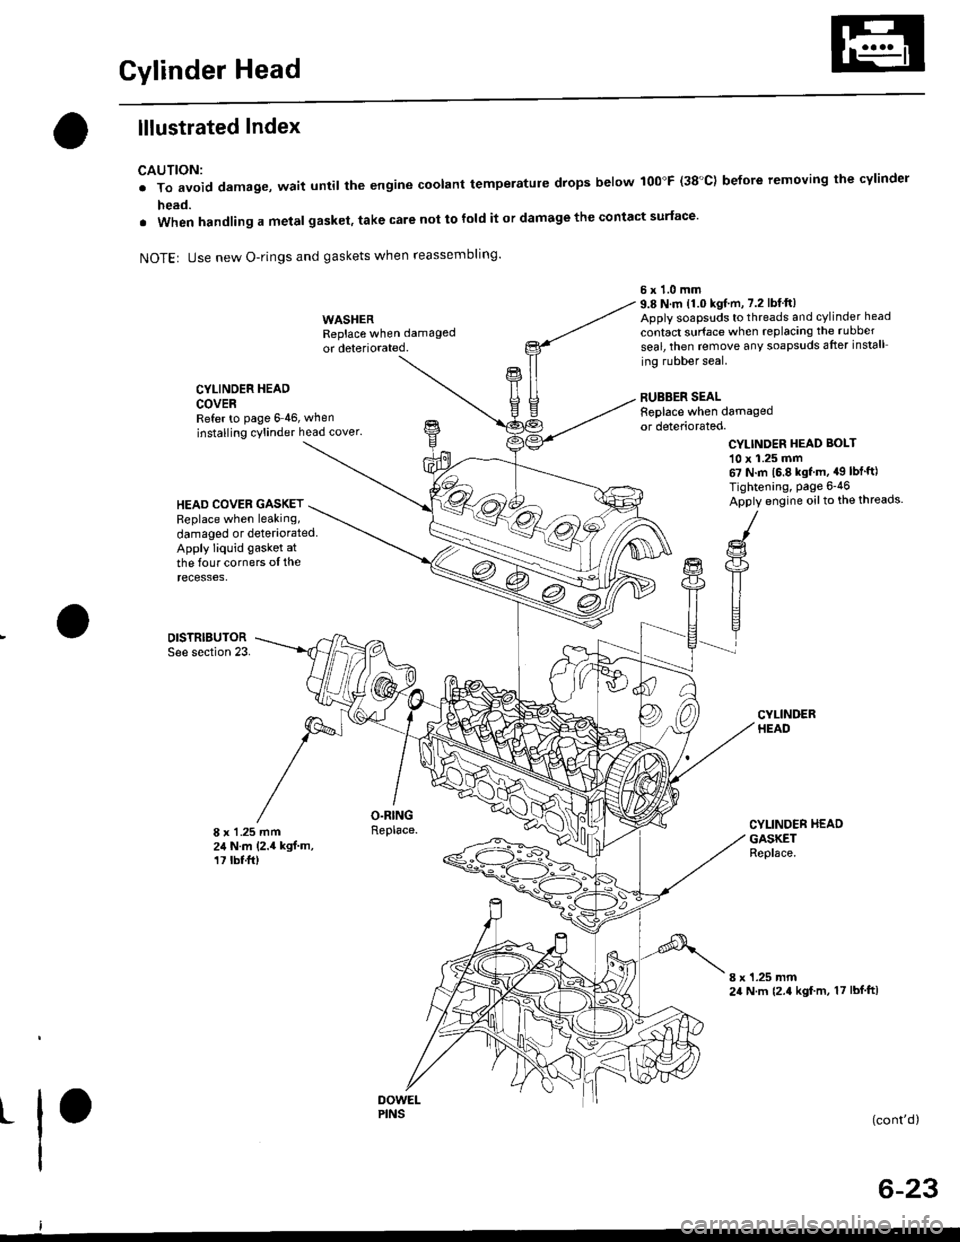 HONDA CIVIC 1998 6.G Owners Manual Gylinder Head
lllustrated Index
CAUTION:
. To avoid damage, wait until the engine coolant temperatule drops below 100"F (38C) before removing the cylinder
head.
. When handling a metal gasket, take c